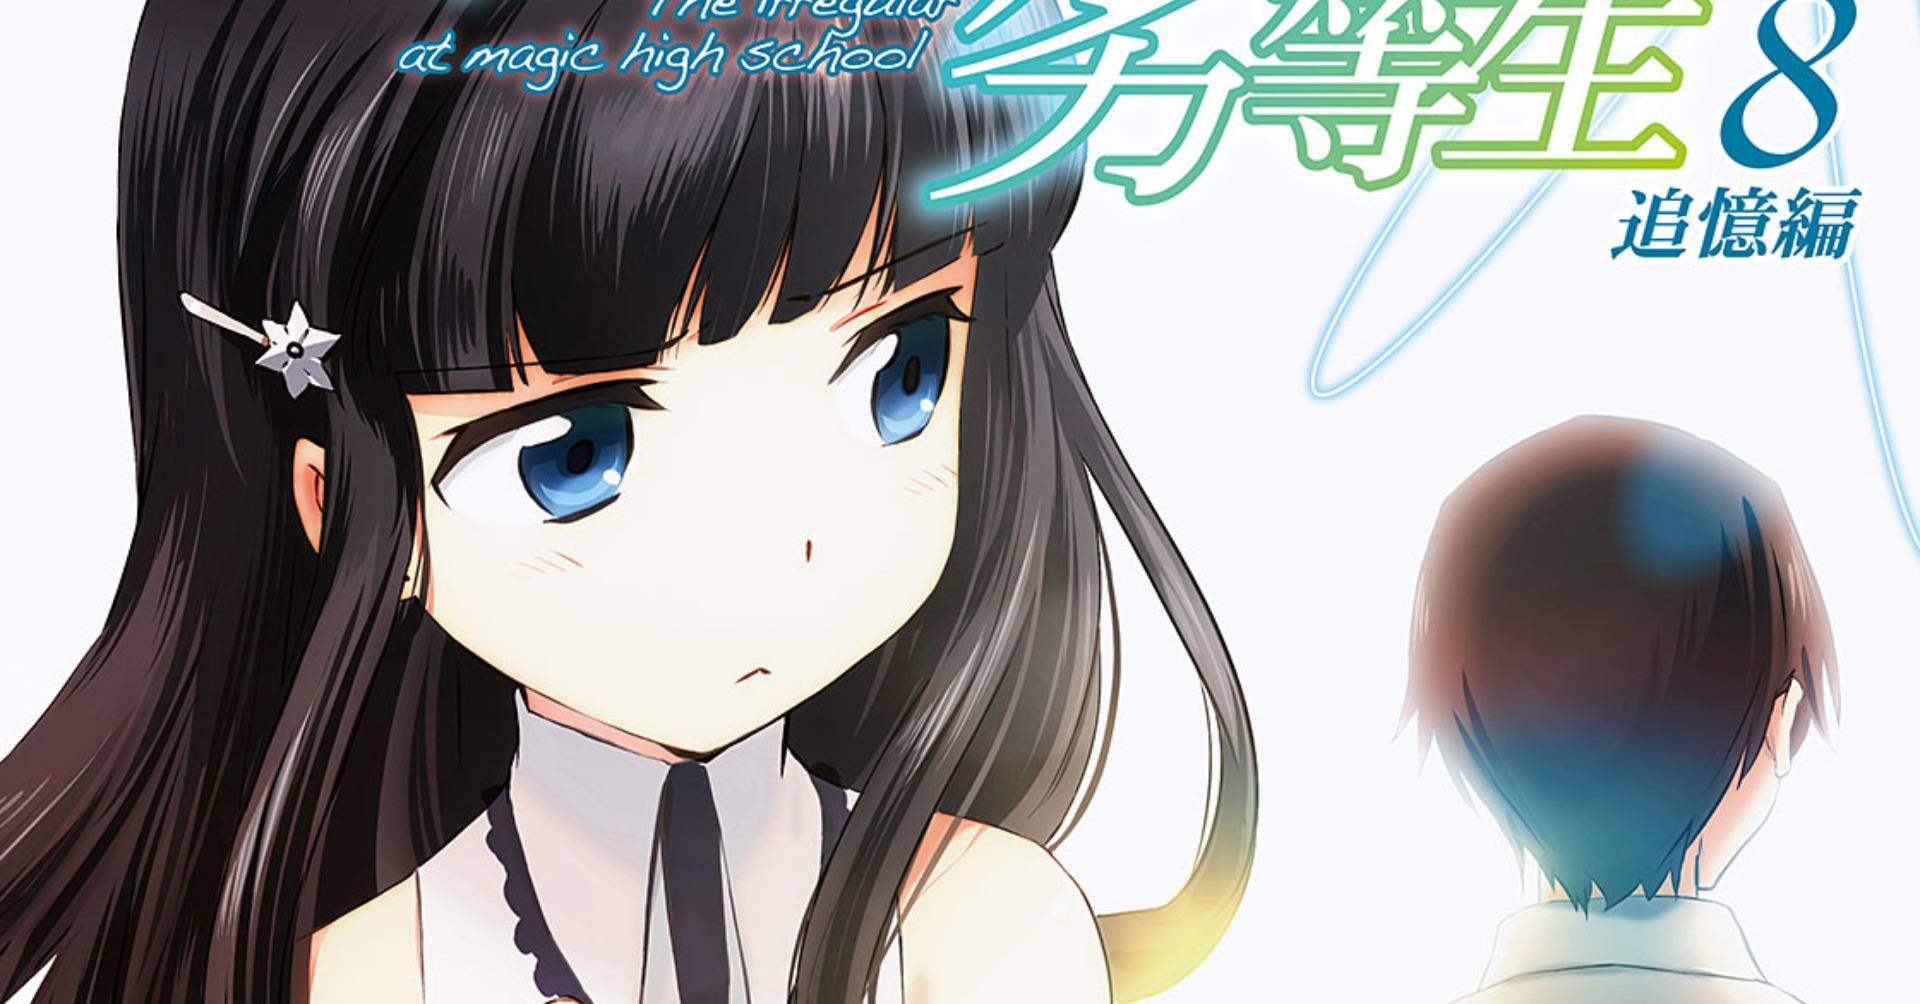 New mahouka anime pv released